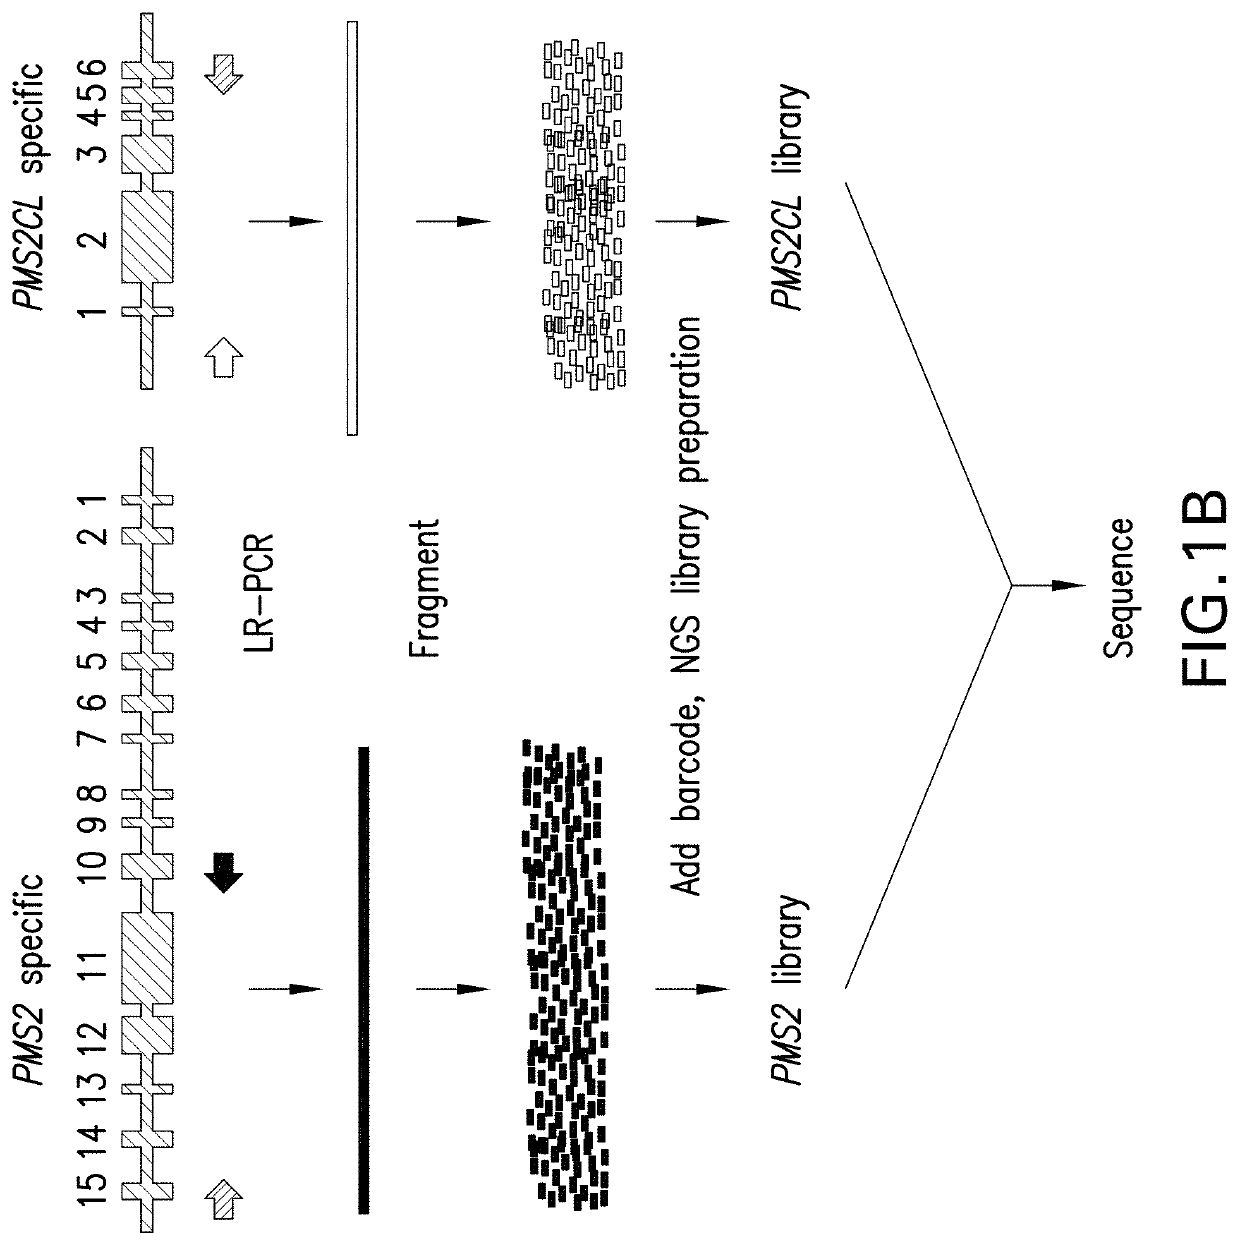 Method for detecting genetic variation in highly homologous sequences by independent alignment and pairing of sequence reads